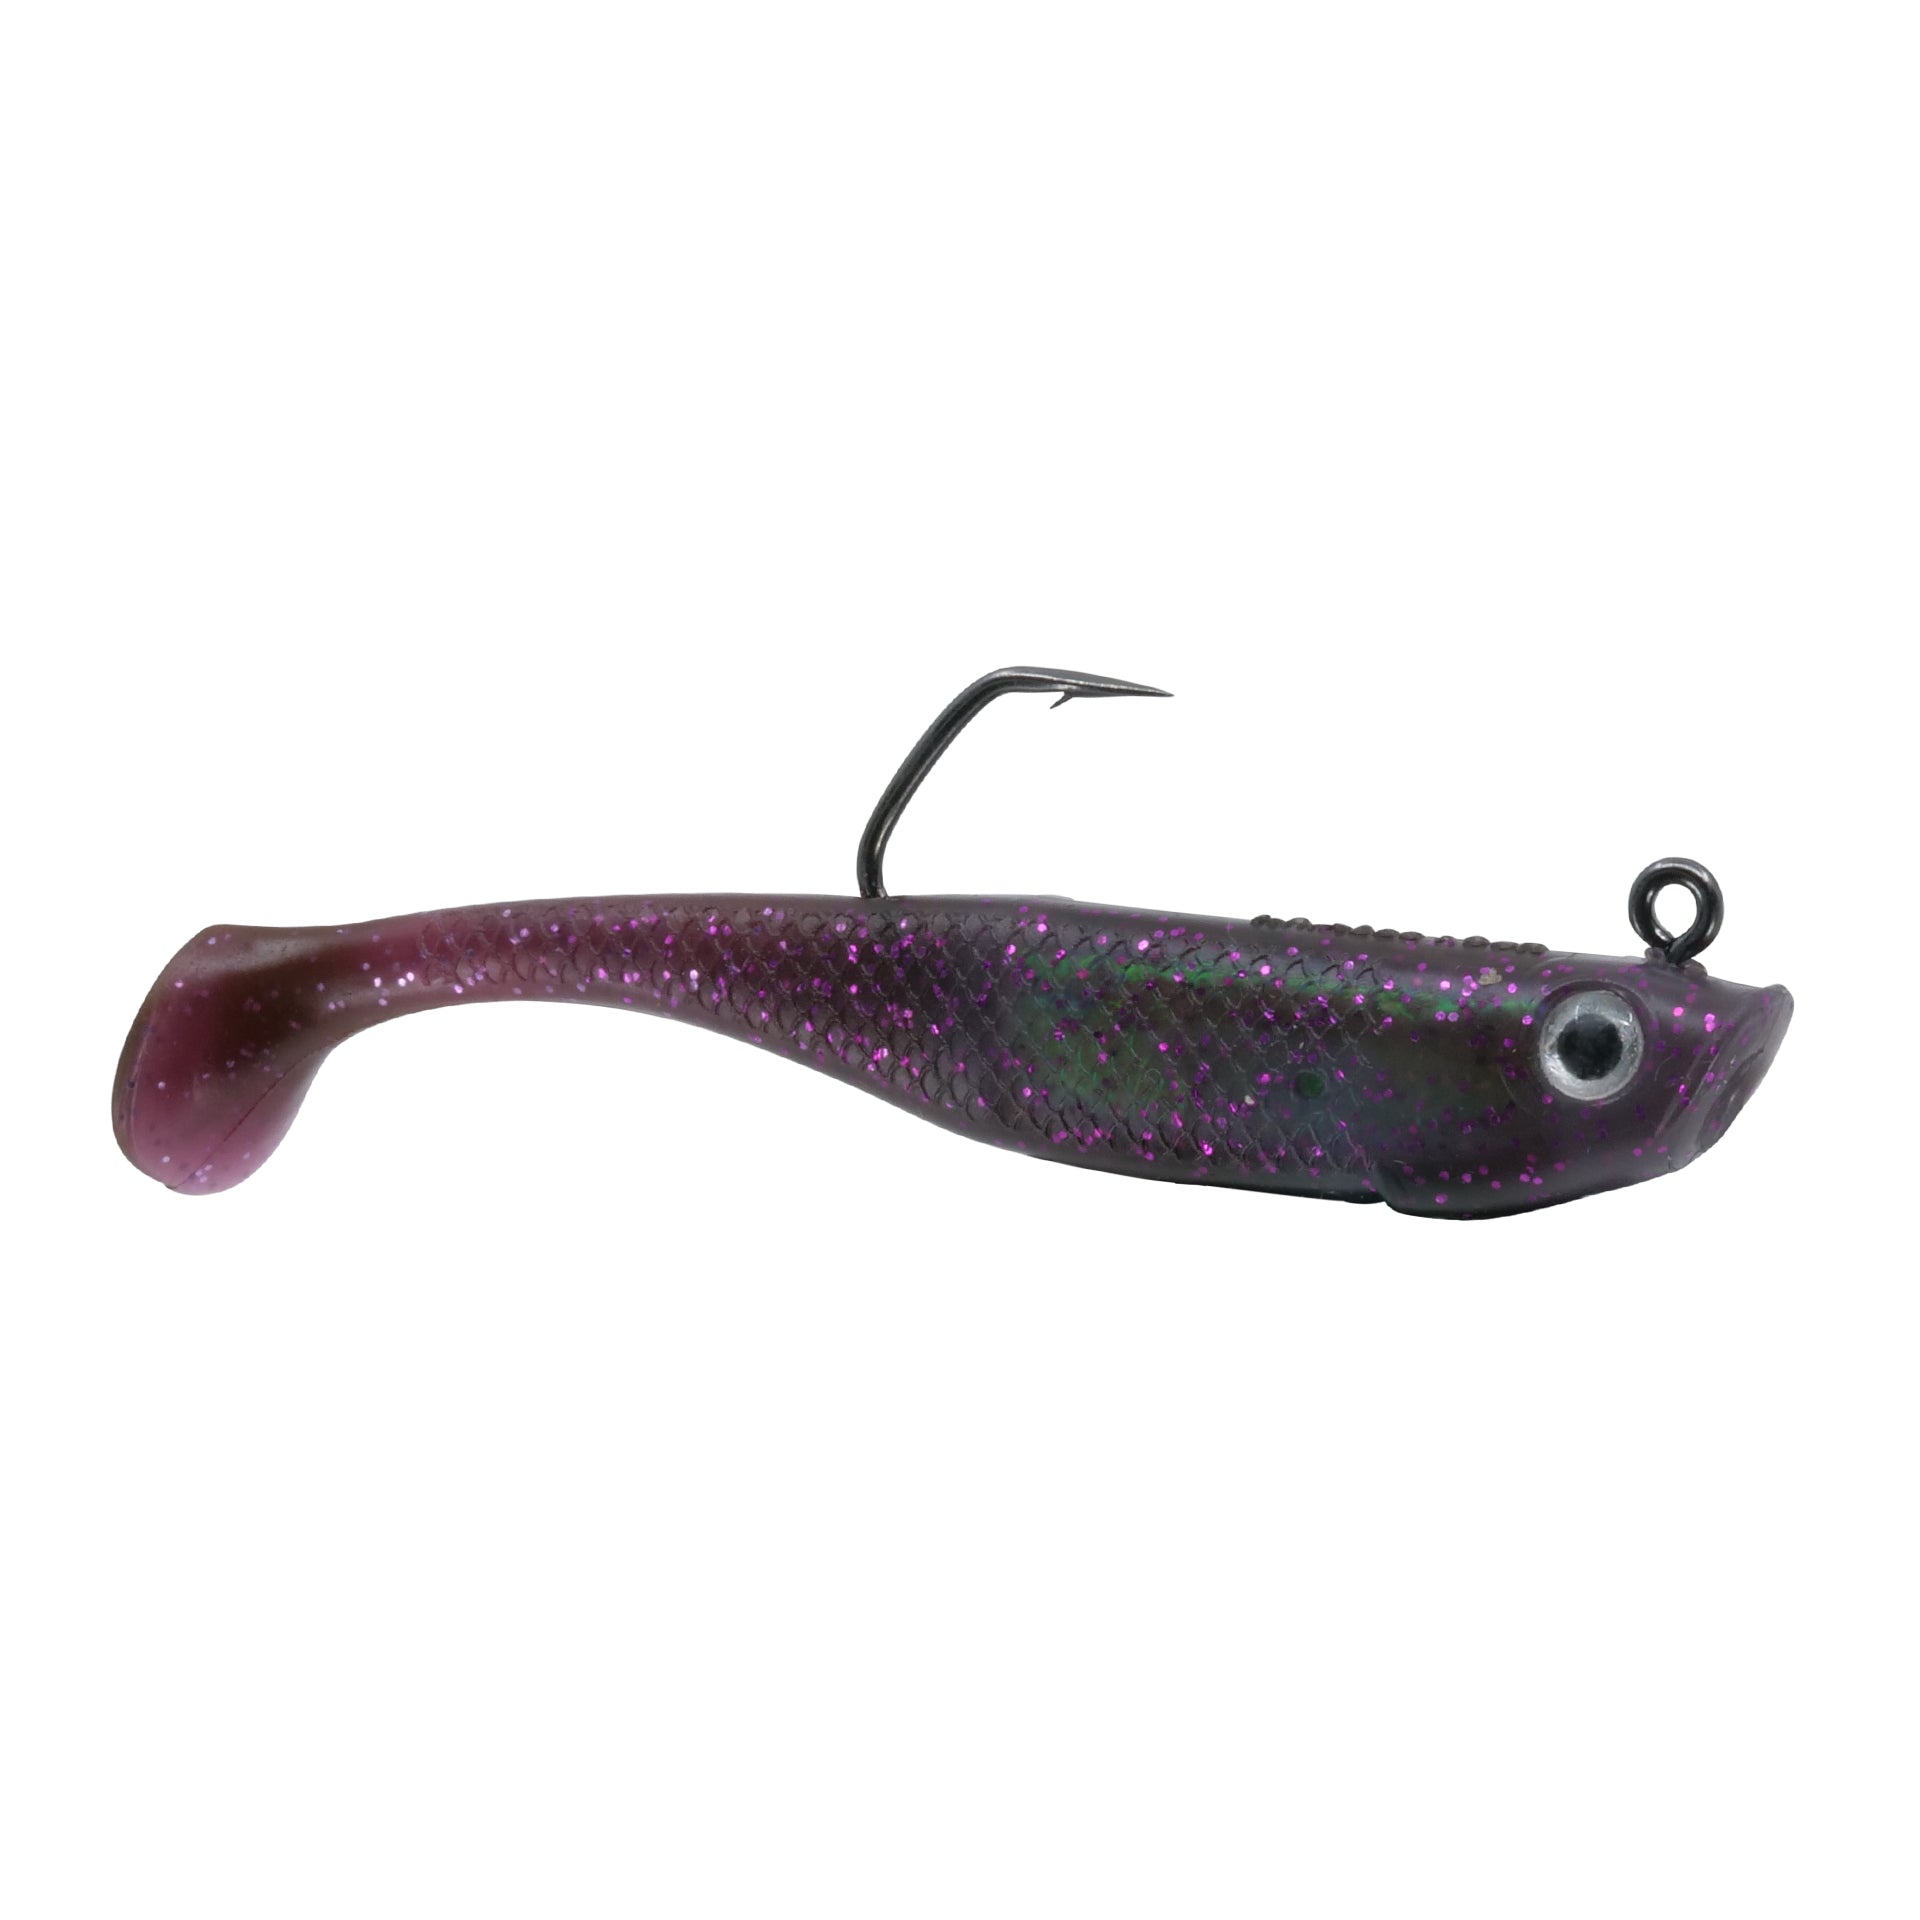 Predilures Bass Lure Crazy snake head 125mm 18g Walking Topwater